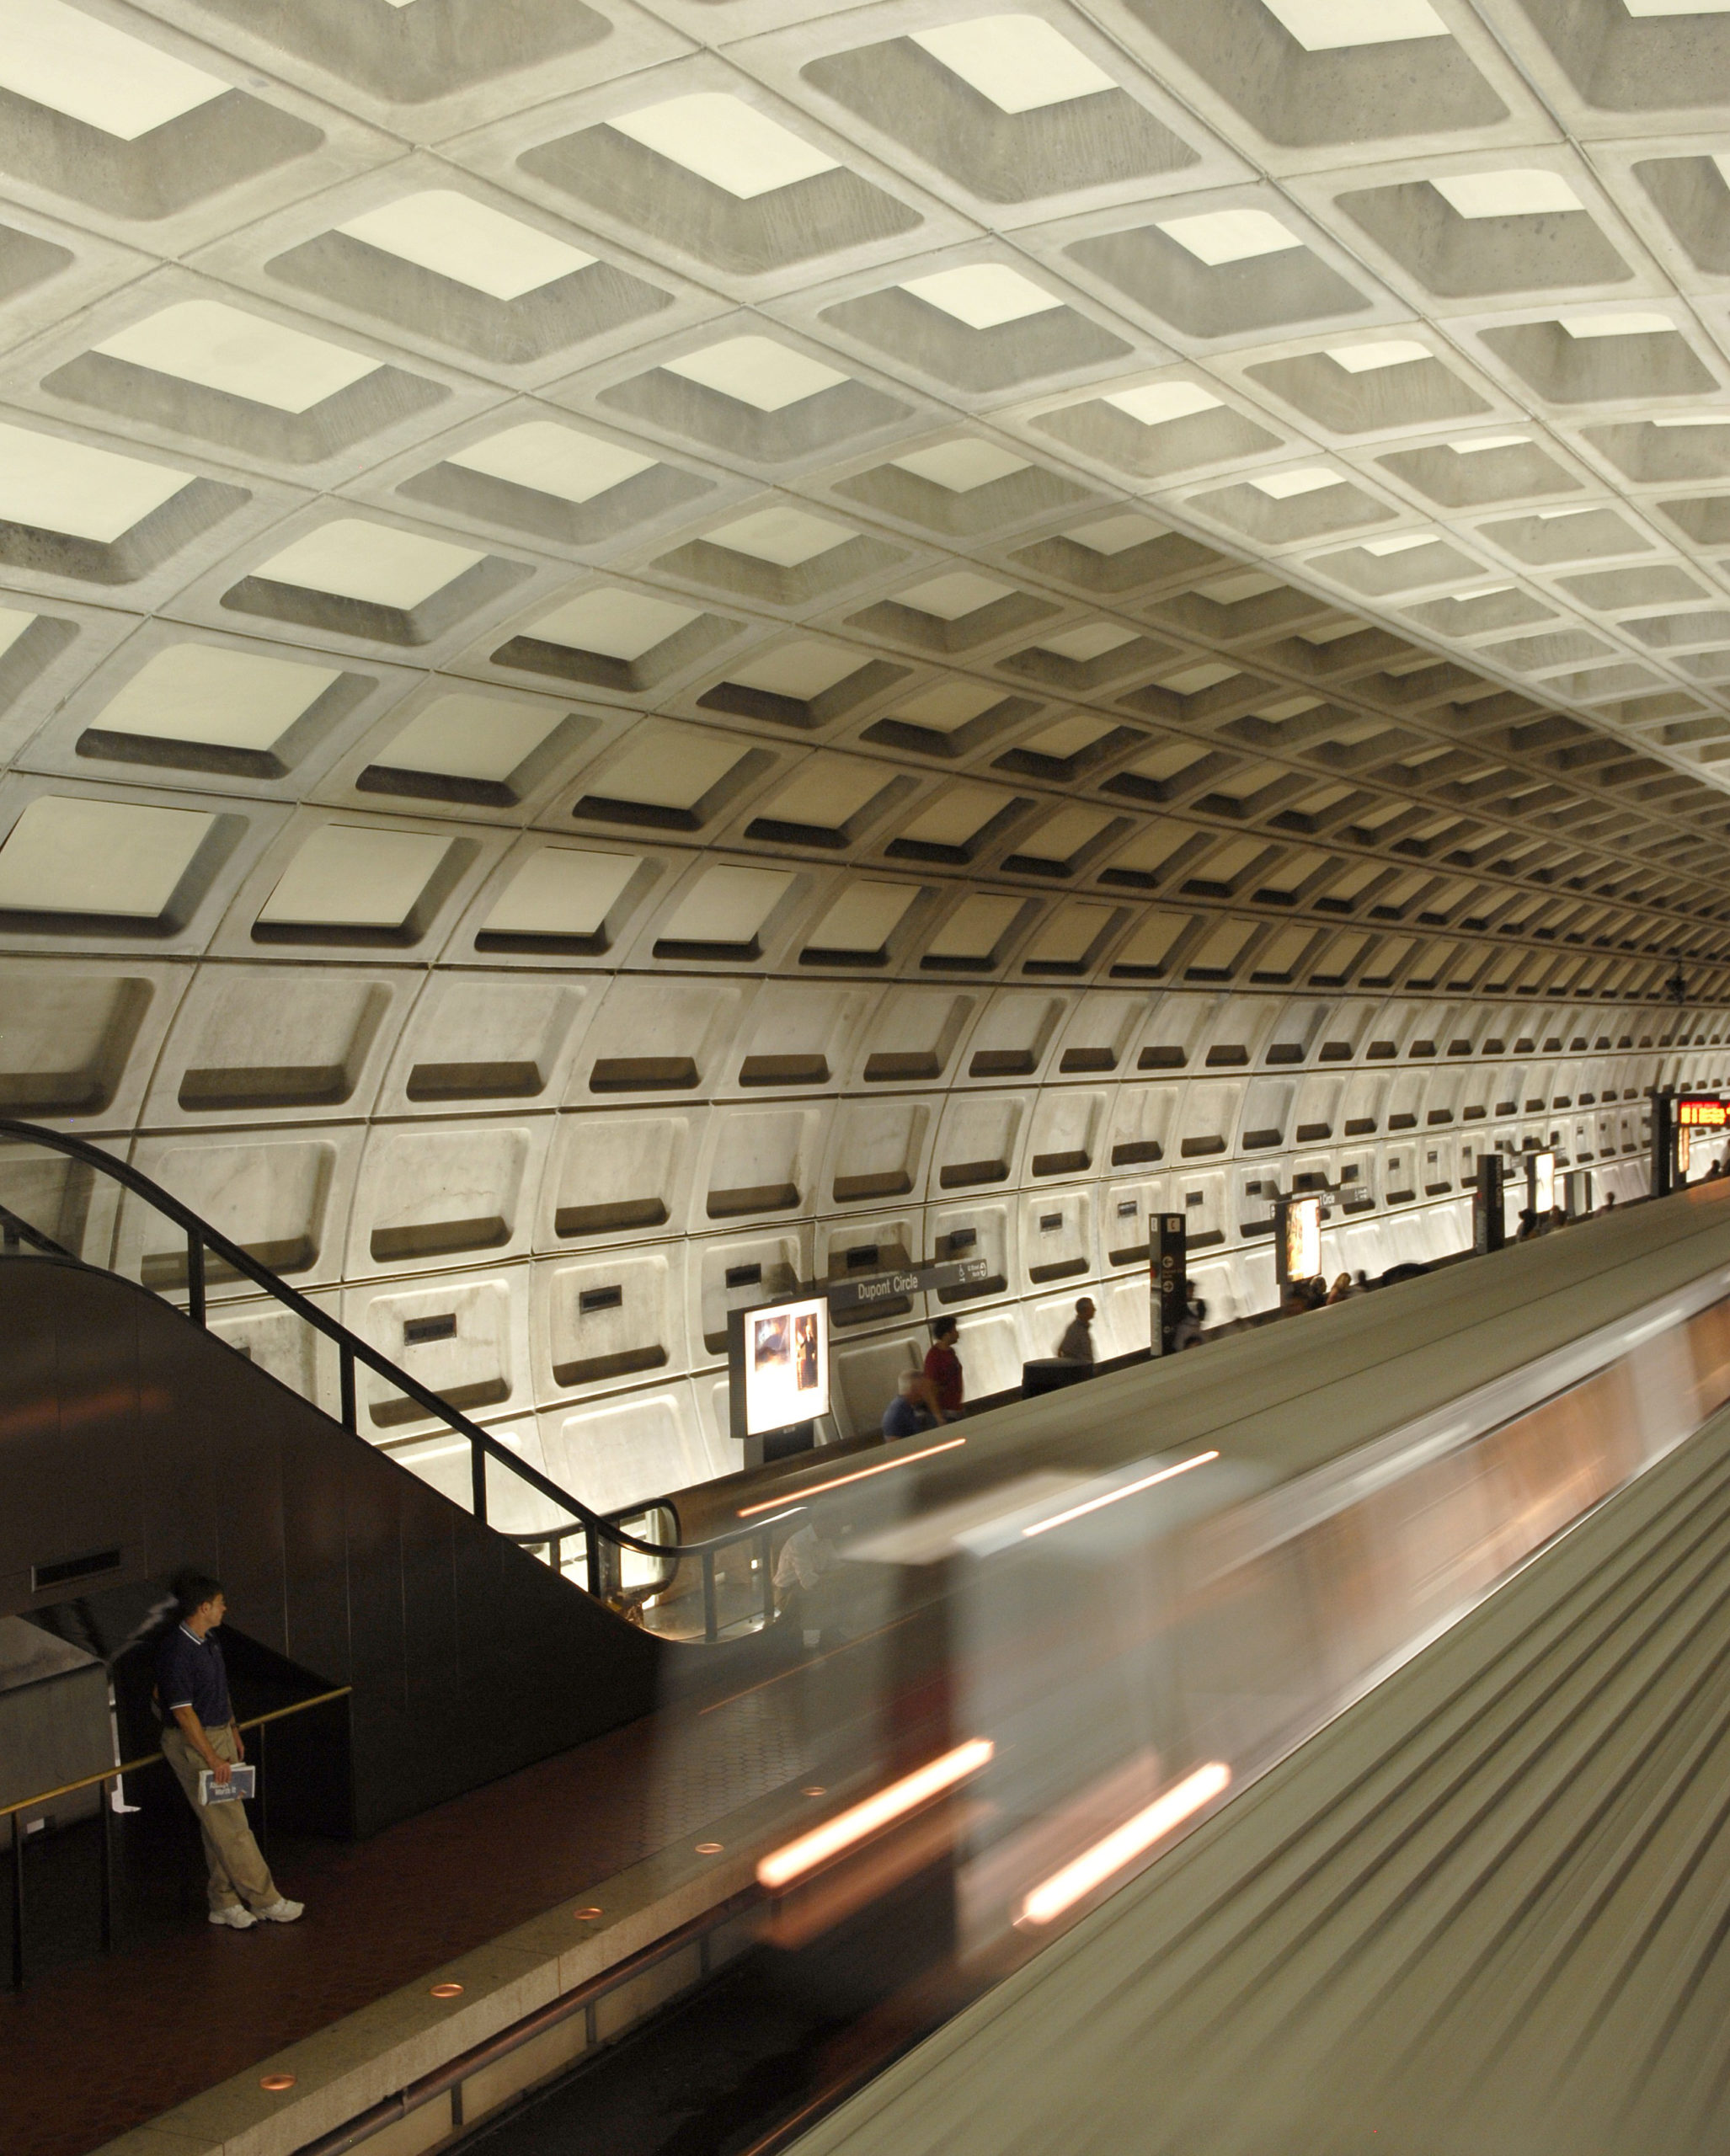 Why The AIA Just Gave Its Most Prestigious Award To A Train Network